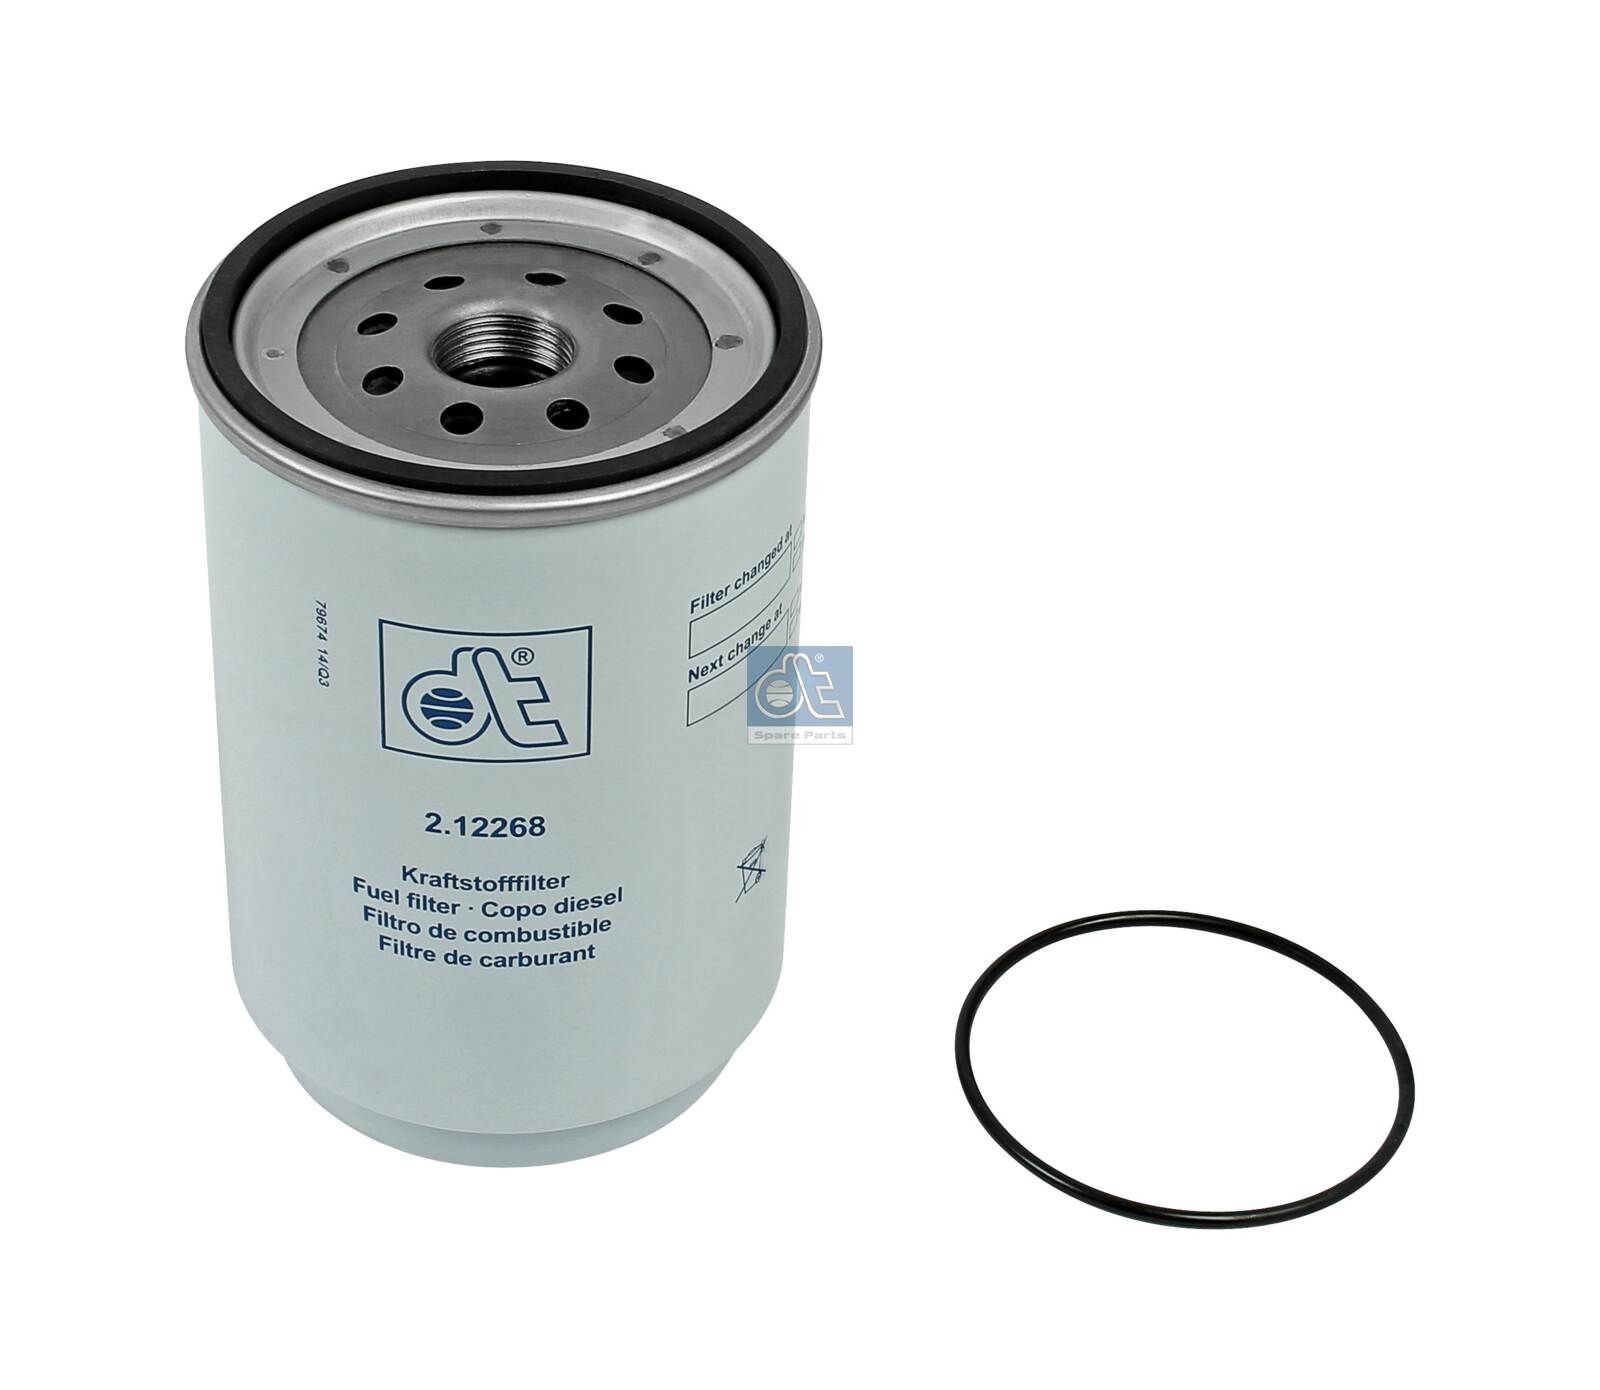 WK 11 001 x DT Spare Parts 2.12268 Fuel filter 7421380483